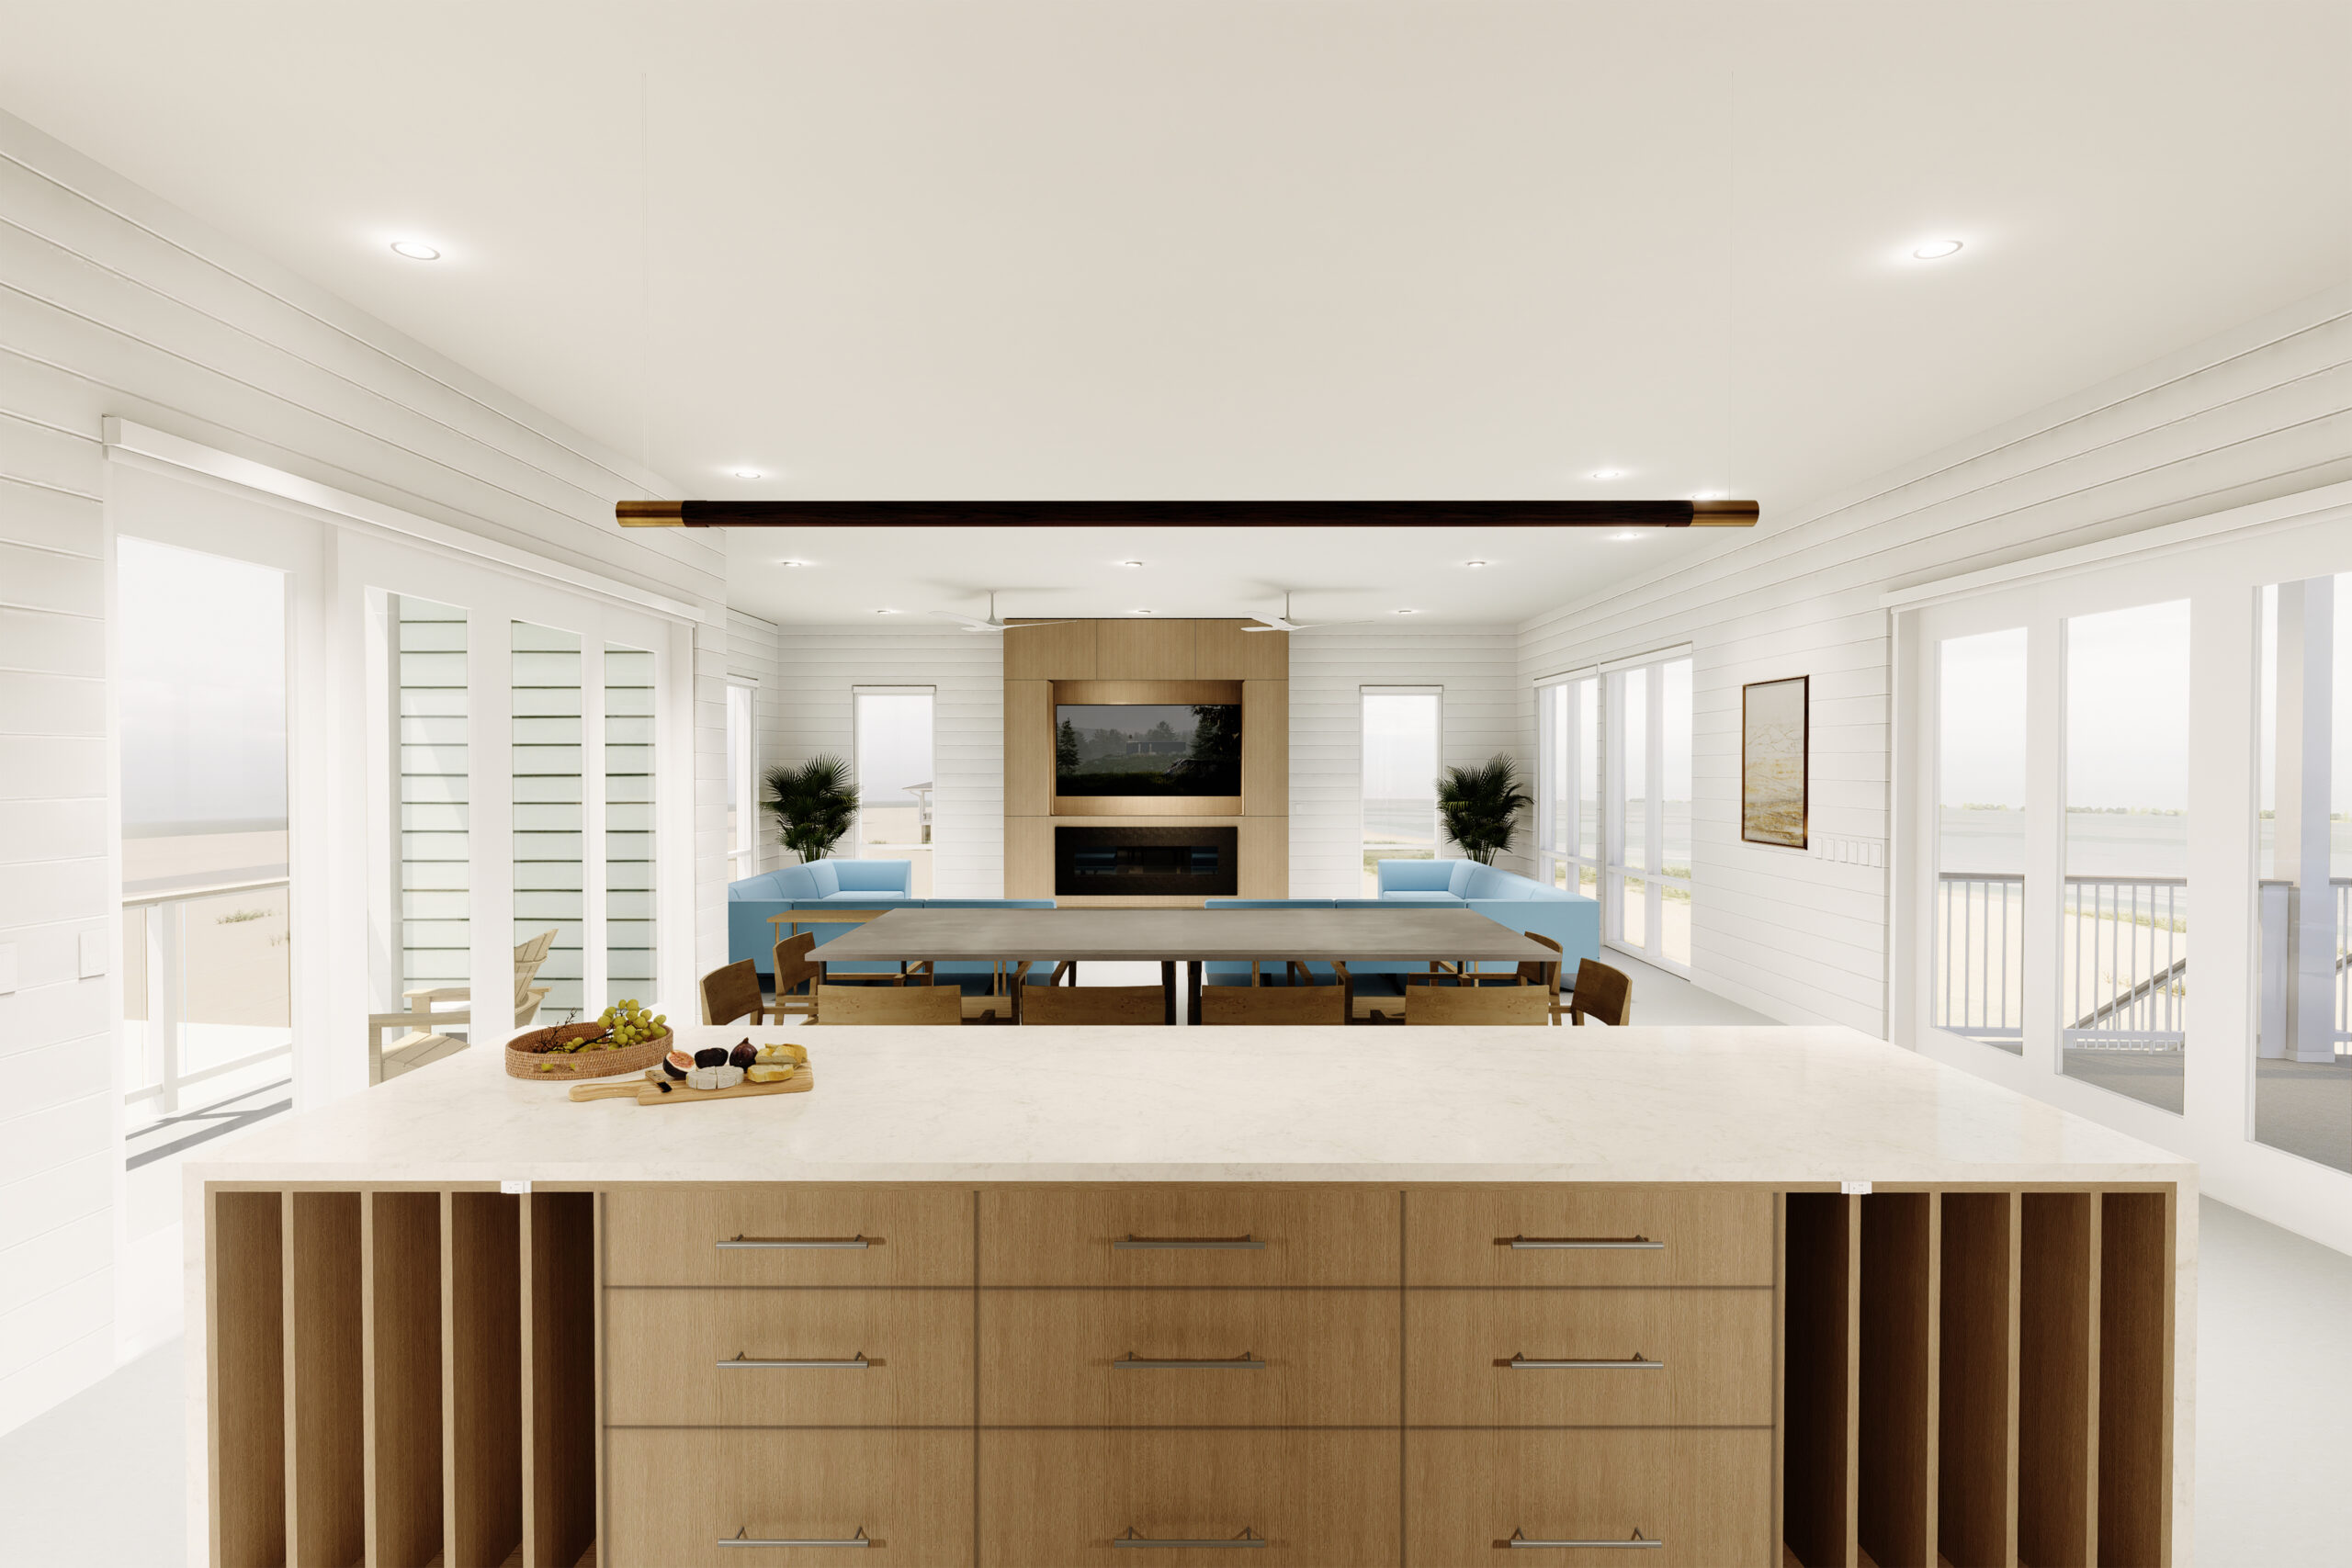 Rendered view over a kitchen island to a living area with large windows on both sides.